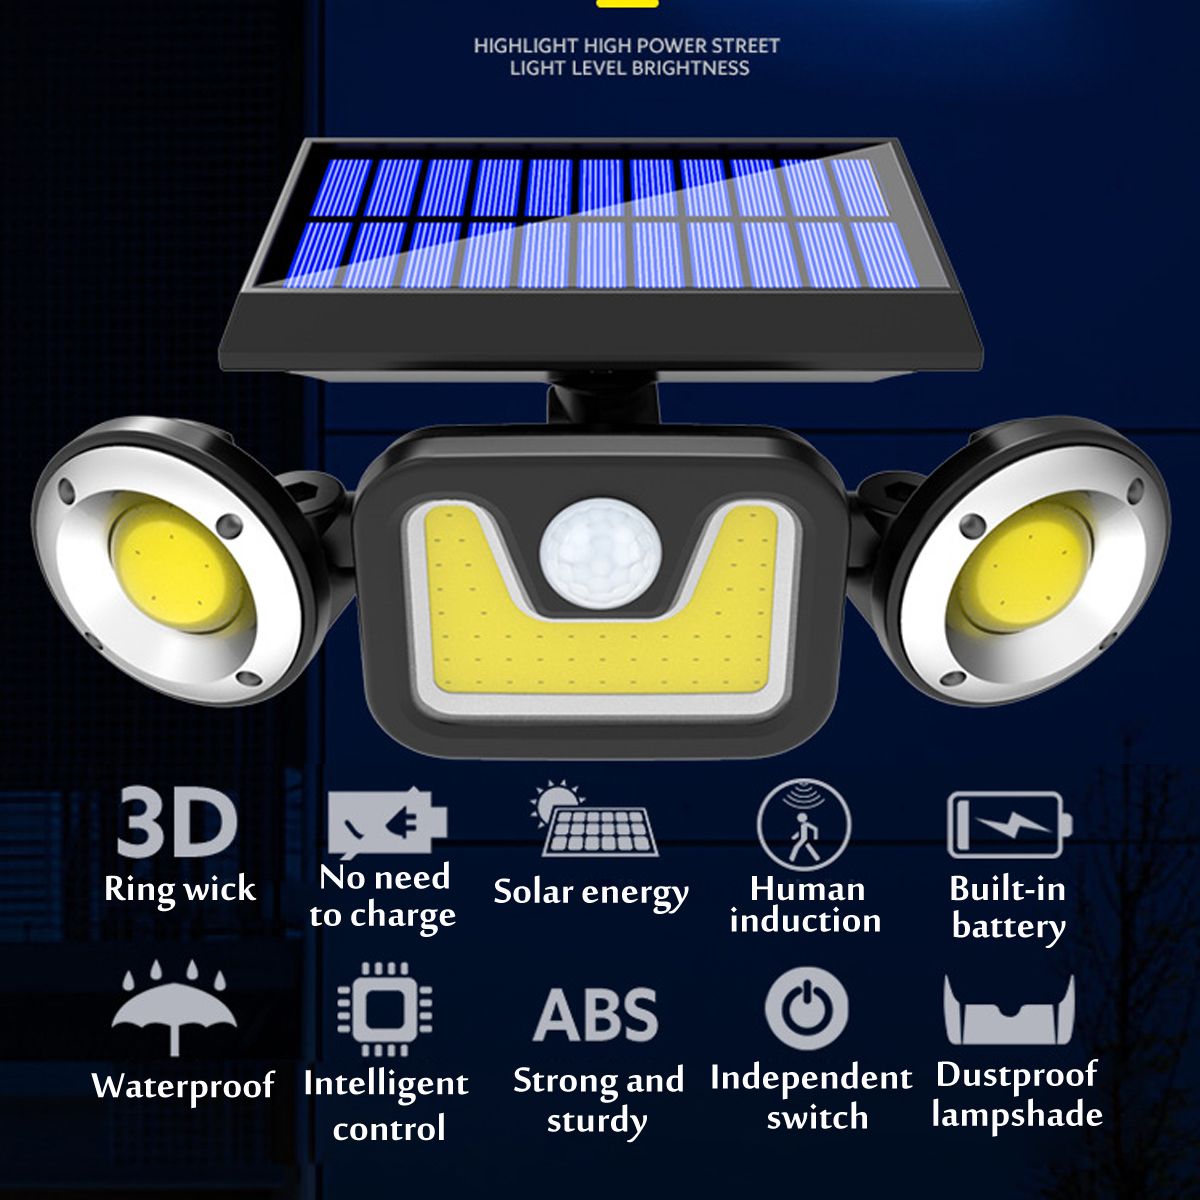 Three-head-Induction-83-COB-LED-Solar-Wall-Street-Light-Pathway-Garden-Lamp-for-Outdoor-Use-1713553